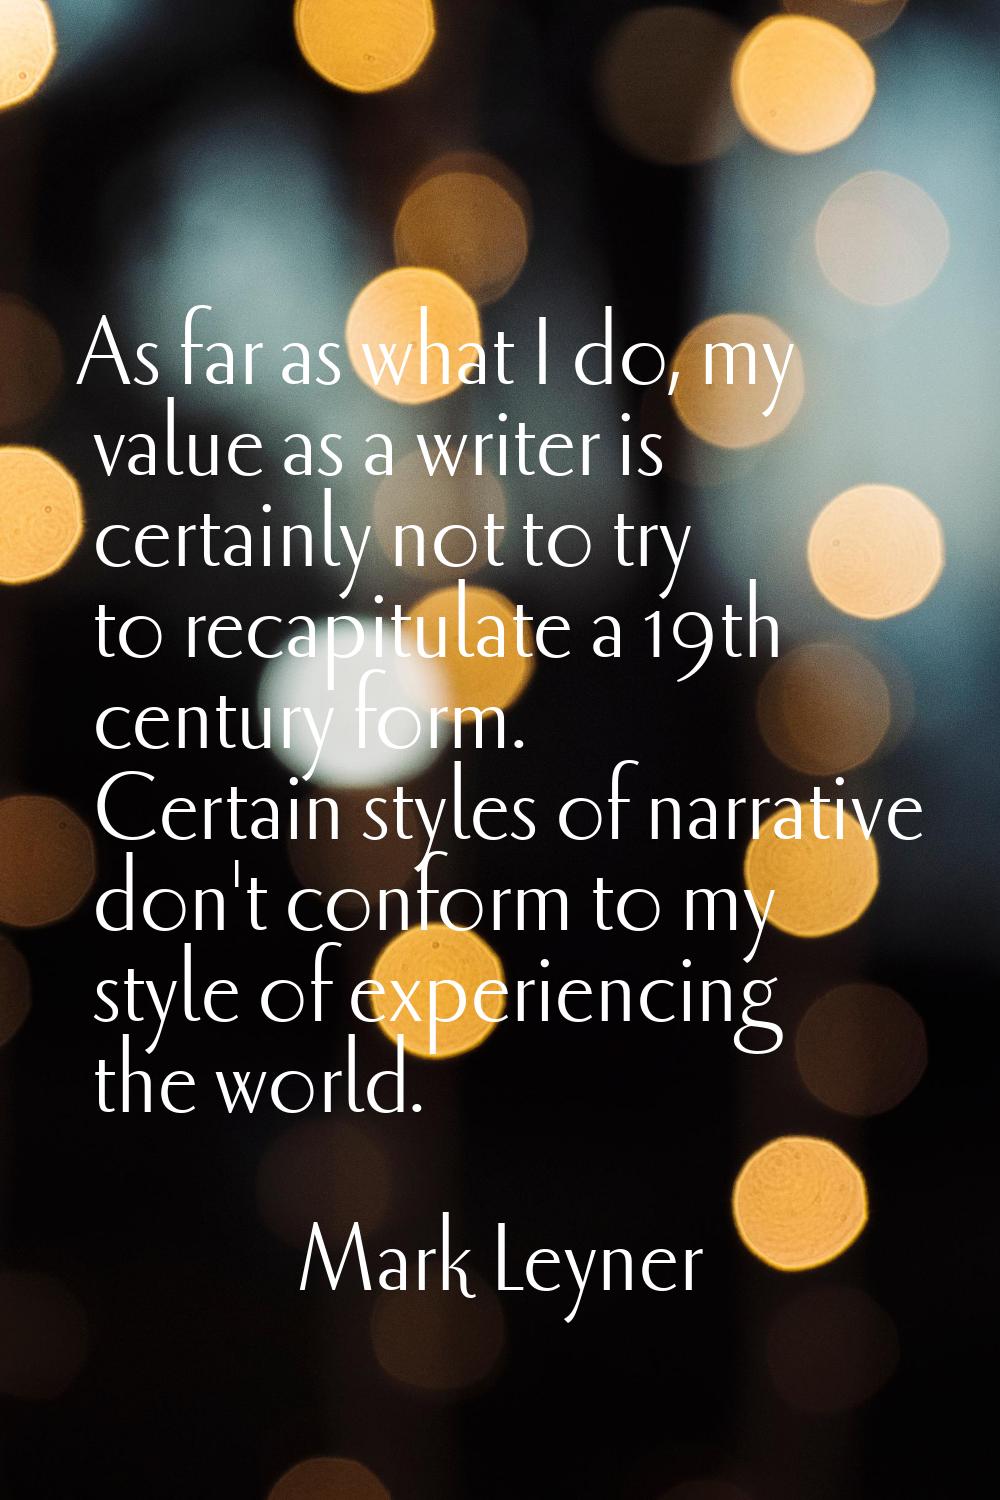 As far as what I do, my value as a writer is certainly not to try to recapitulate a 19th century fo